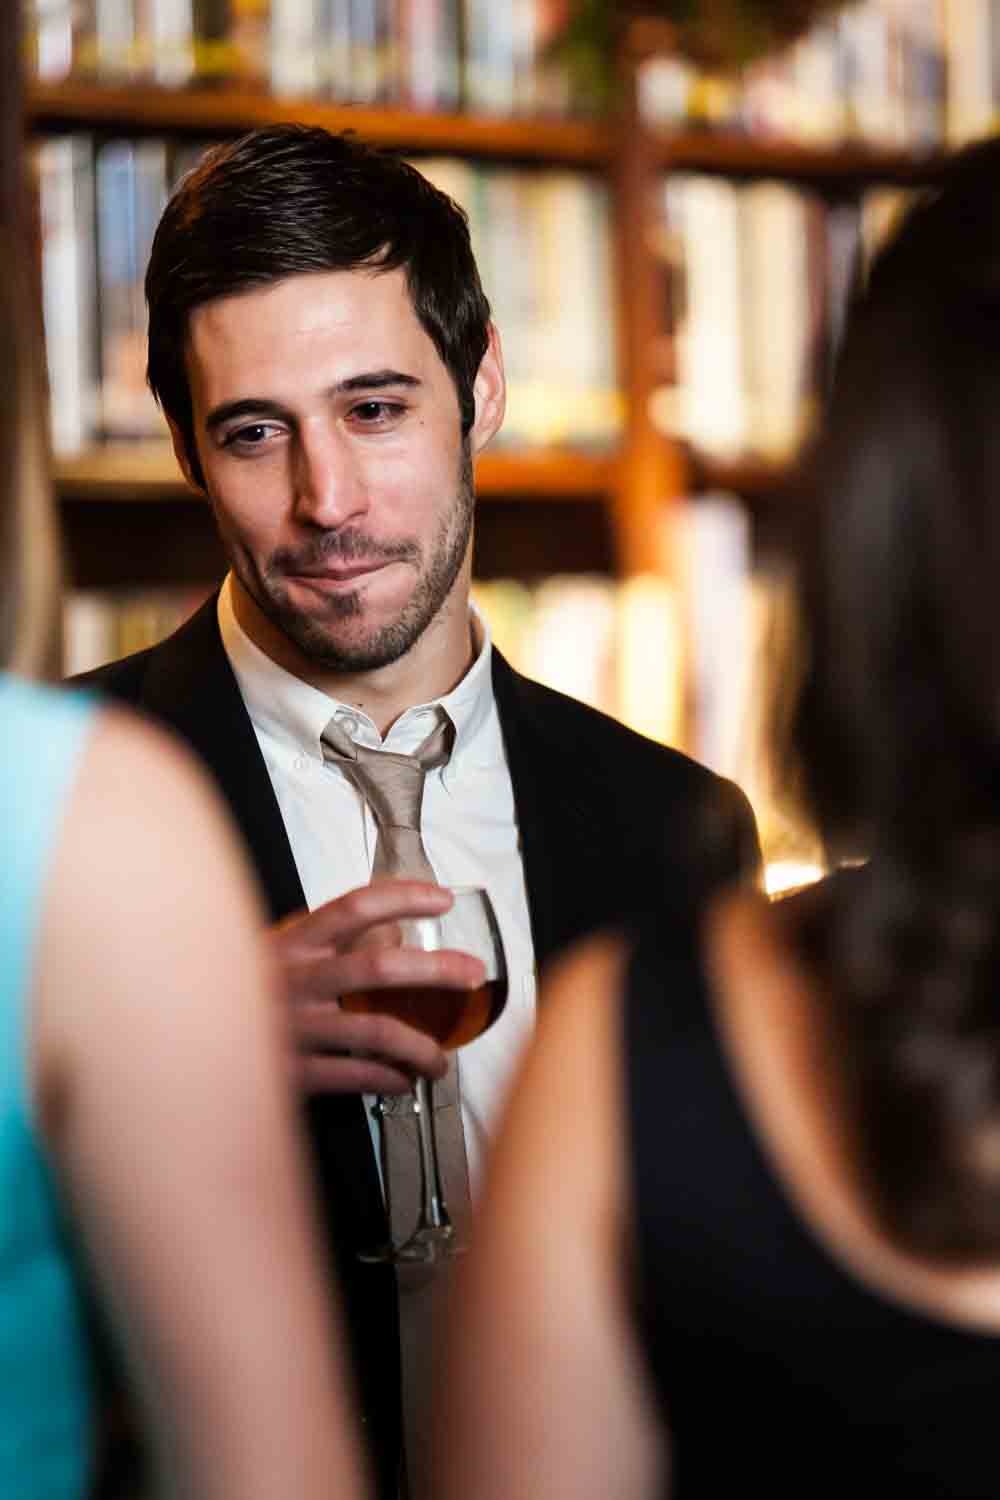 Man holding wine glass and listening to guests